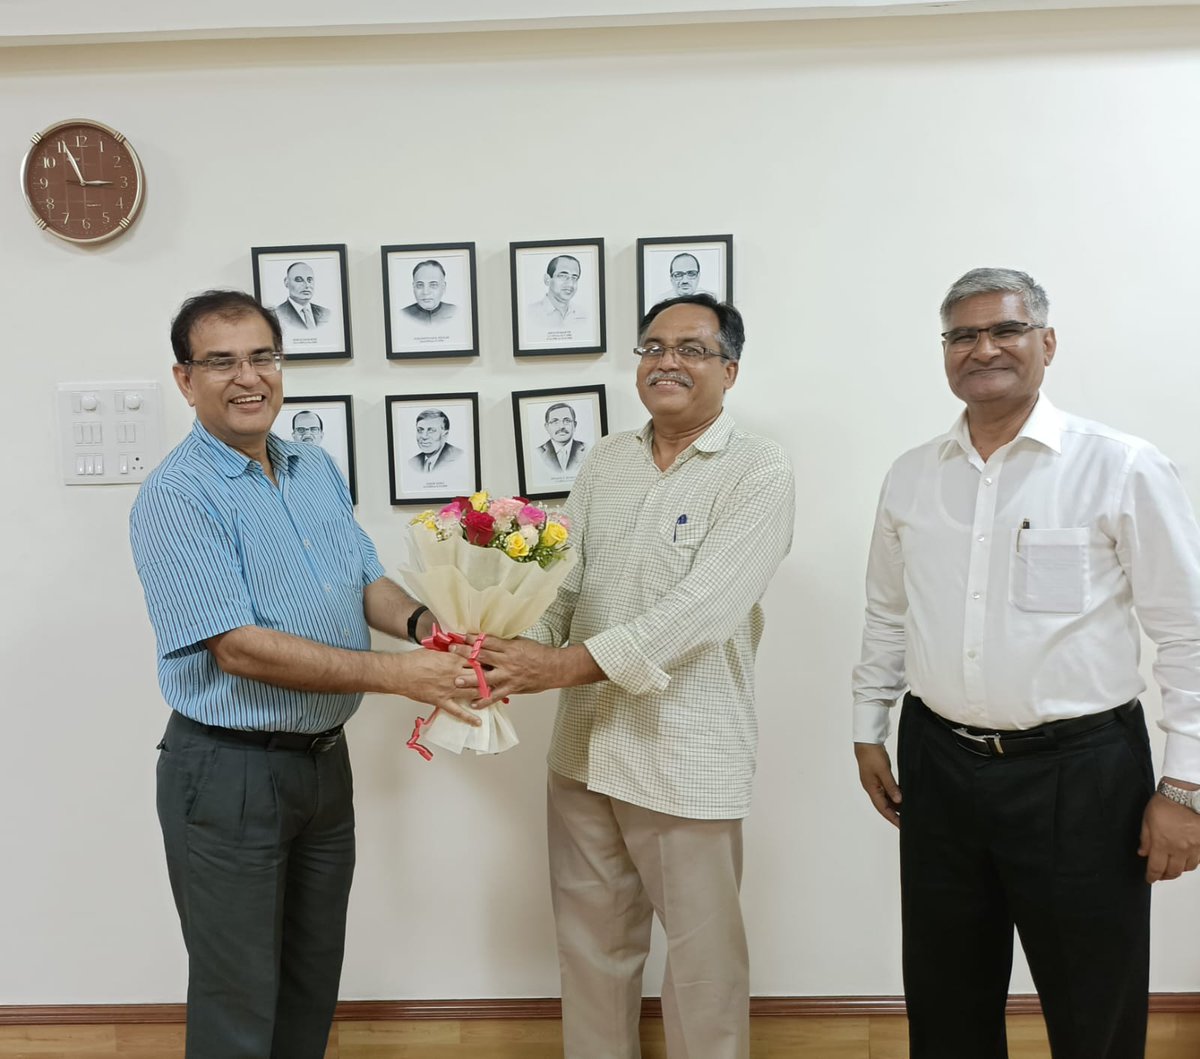 We are happy to announce that Prof. Shireesh Kedare, Professor in the Department of Energy Science and Engineering, has been appointed as the new Director of IIT Bombay! 🌟 He will assume charge as Director on May 6, 2024.